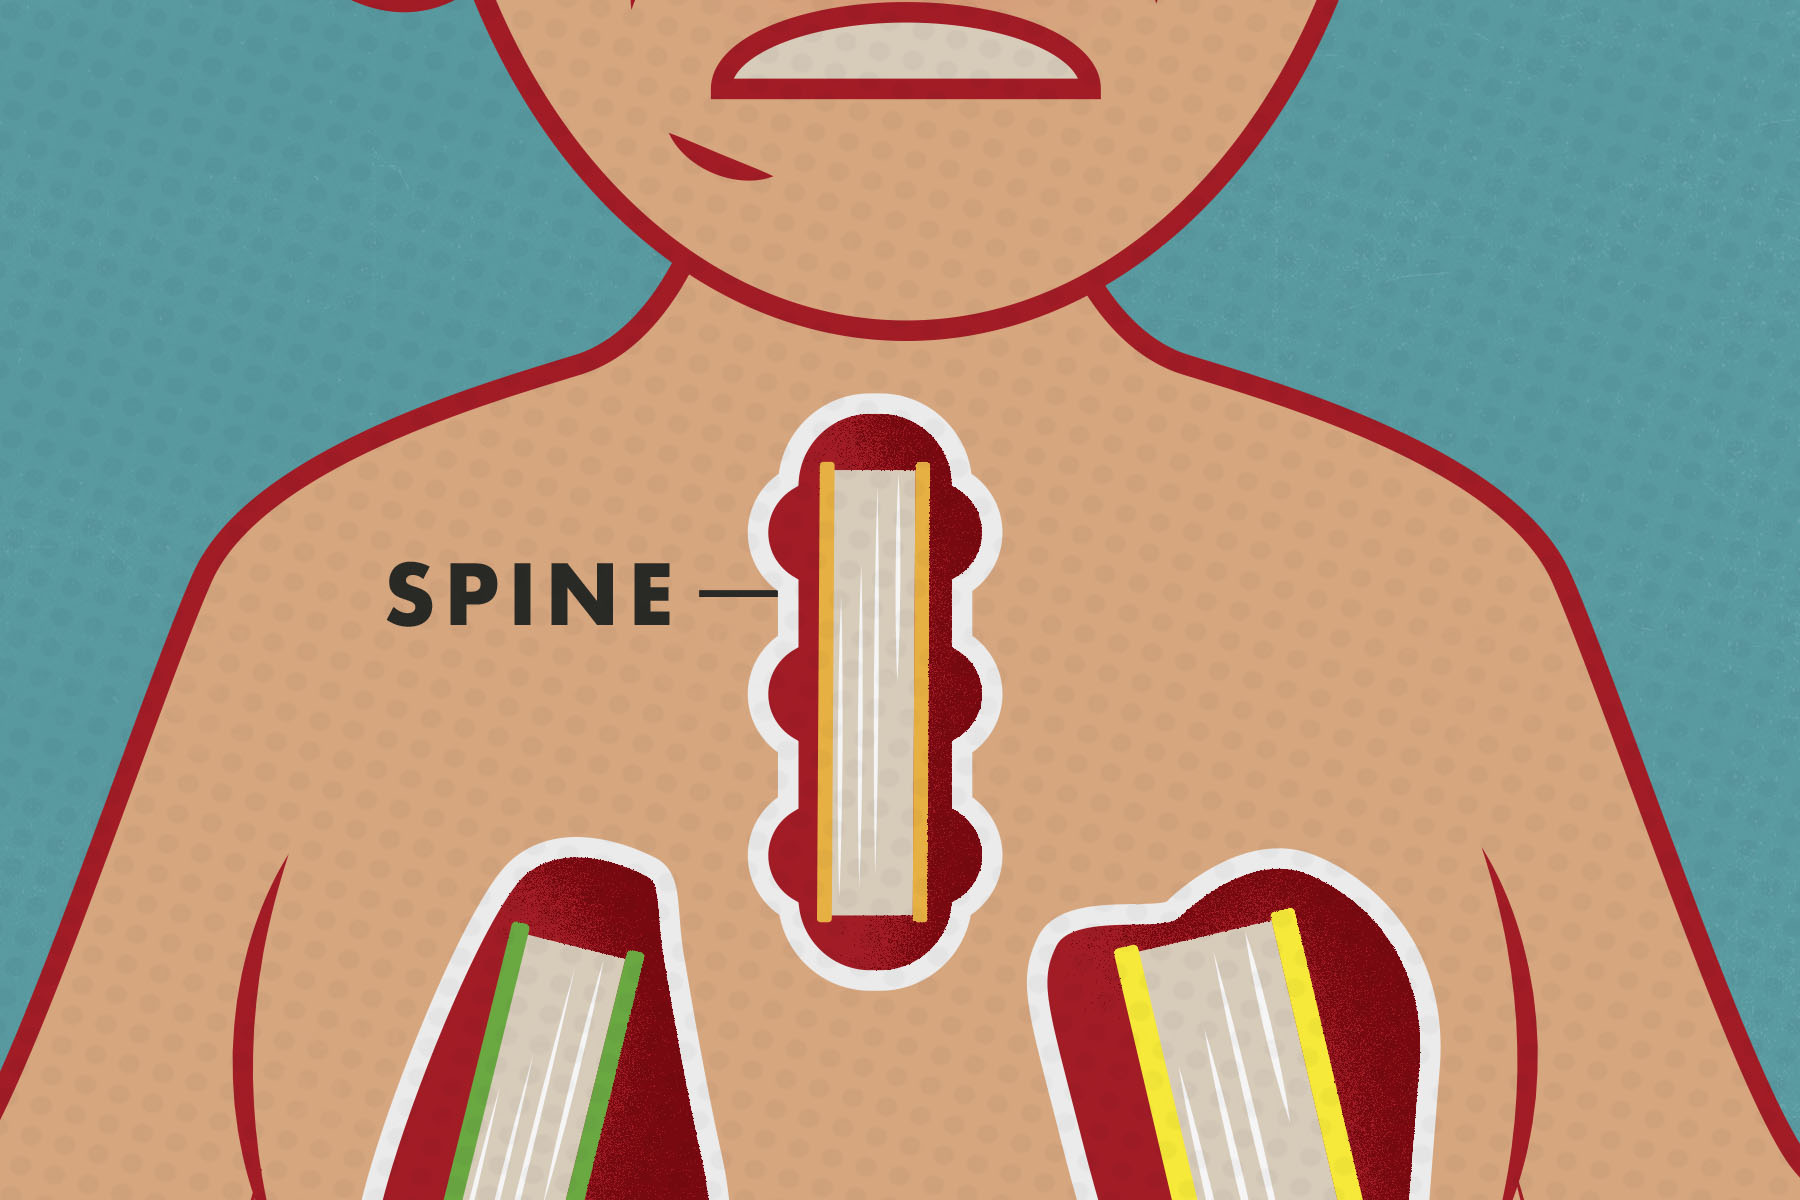 A boardgame-style illustration of a book as a spine